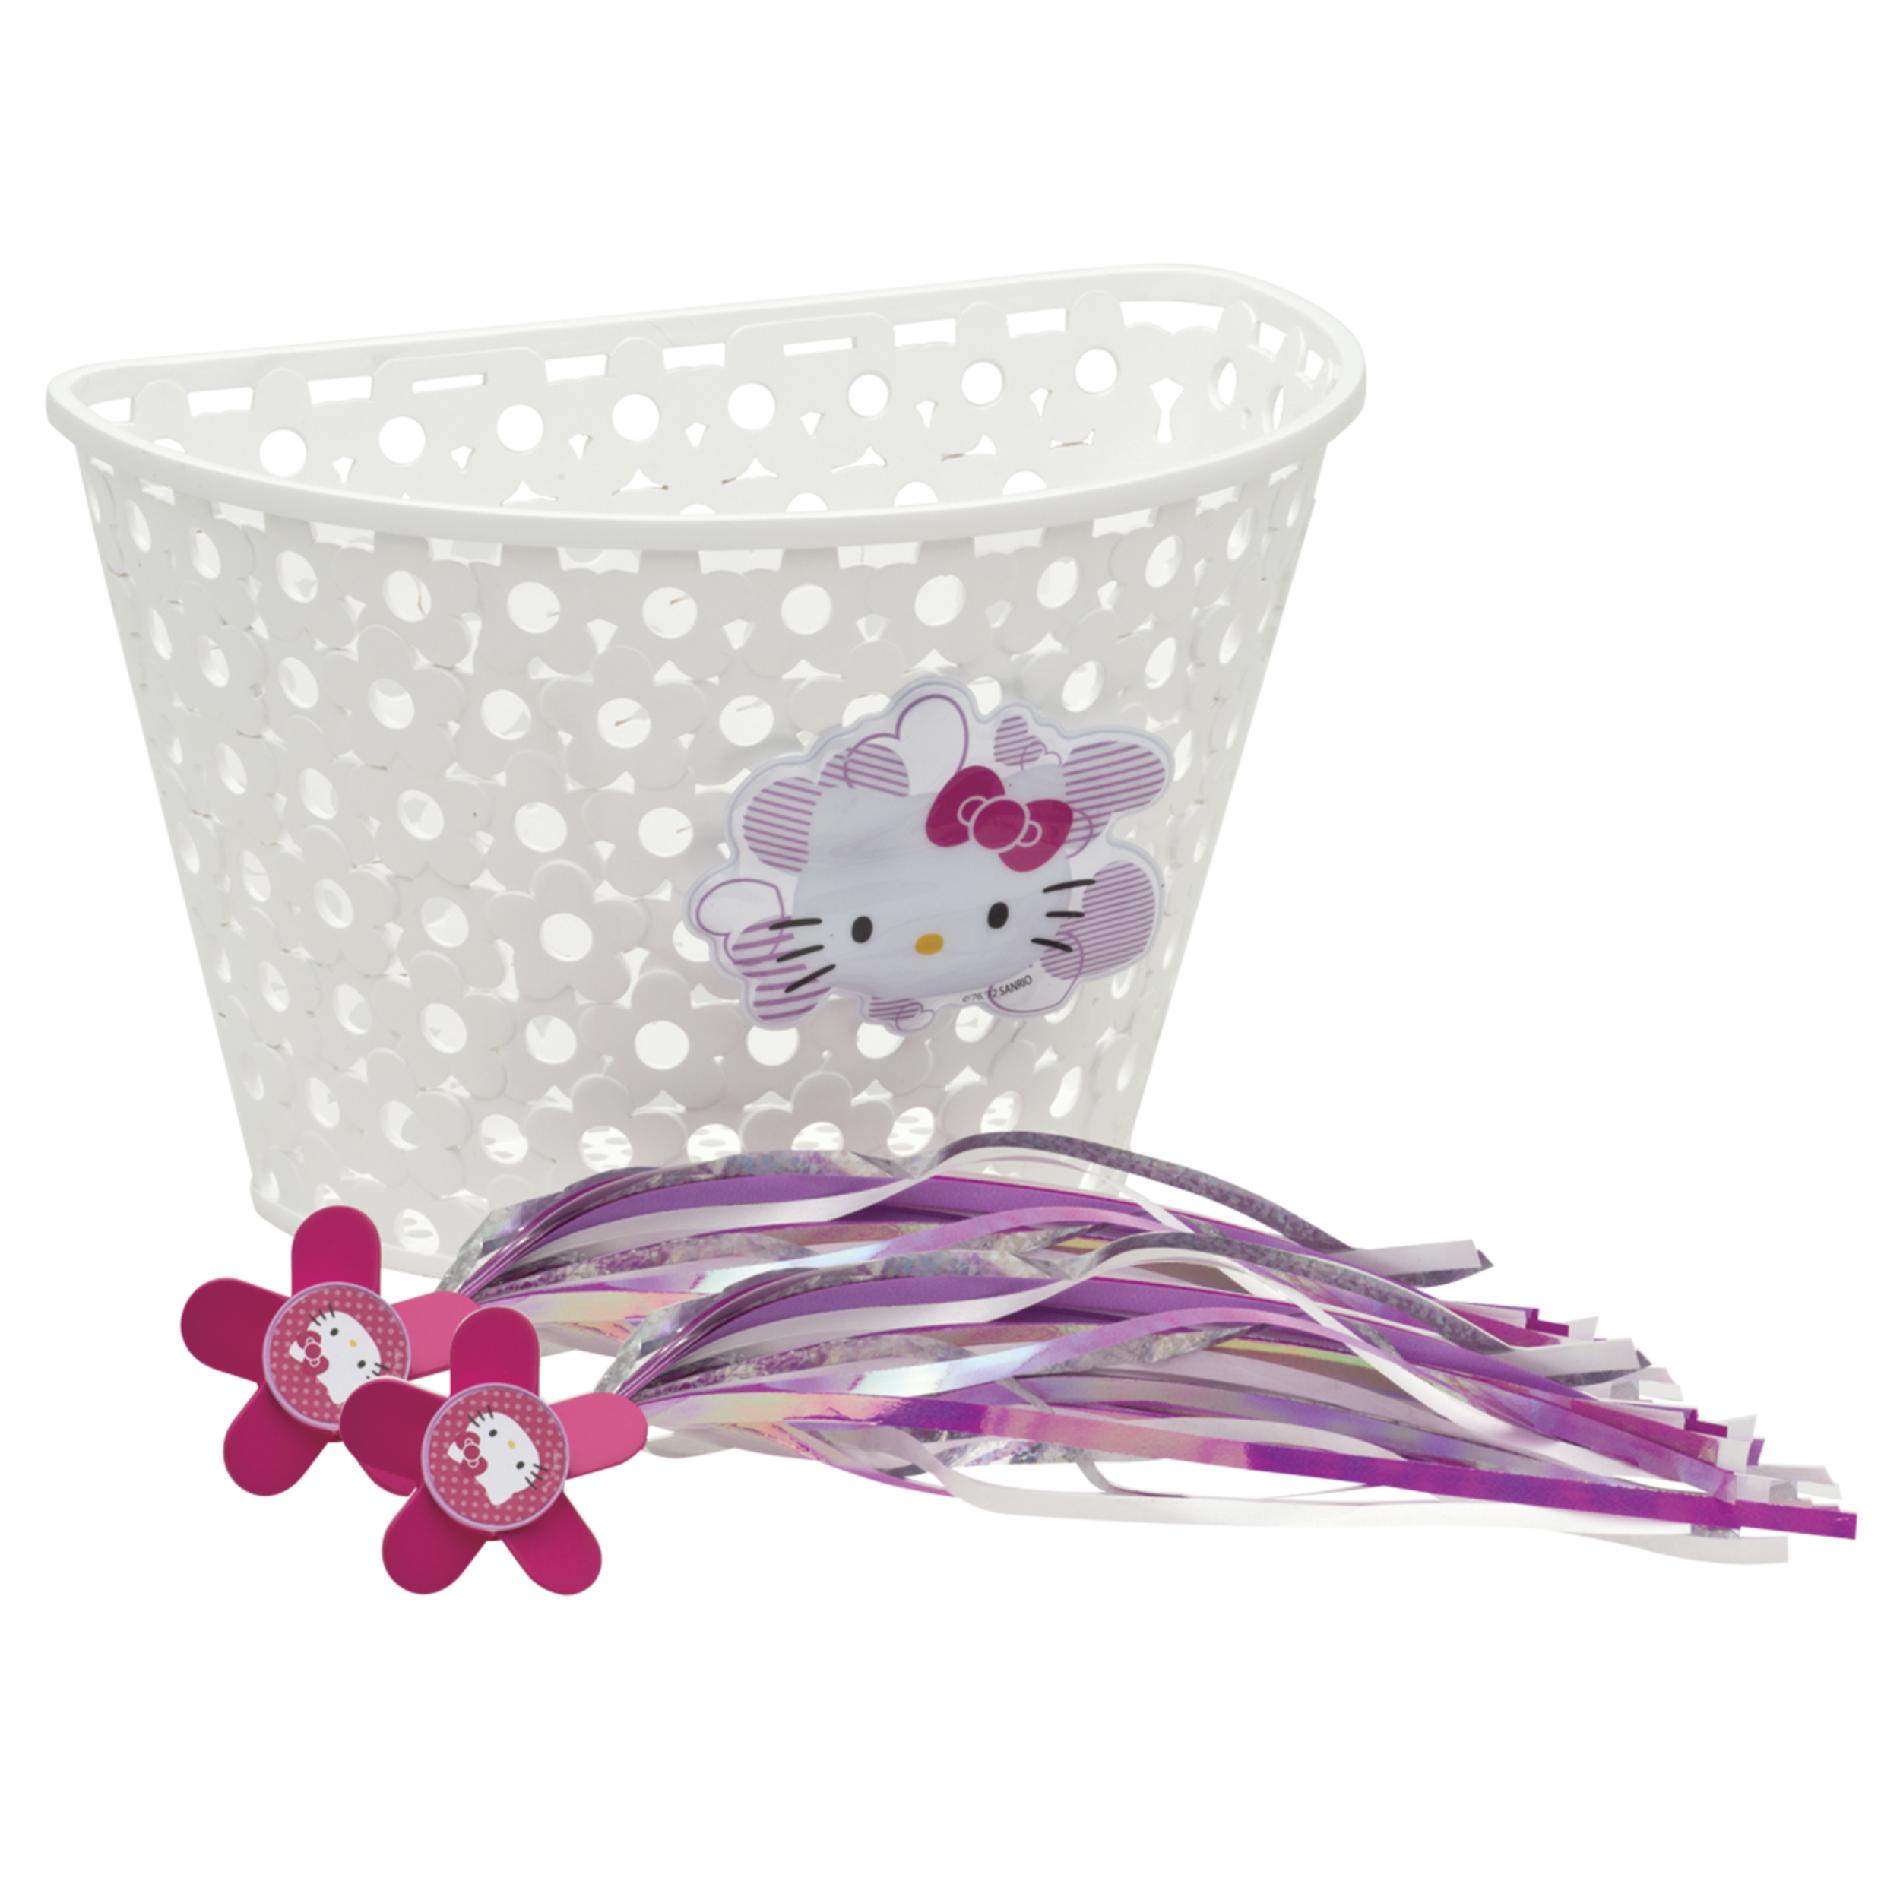 Bell Automotive 7001236 Hello Kitty Basket and Streamers